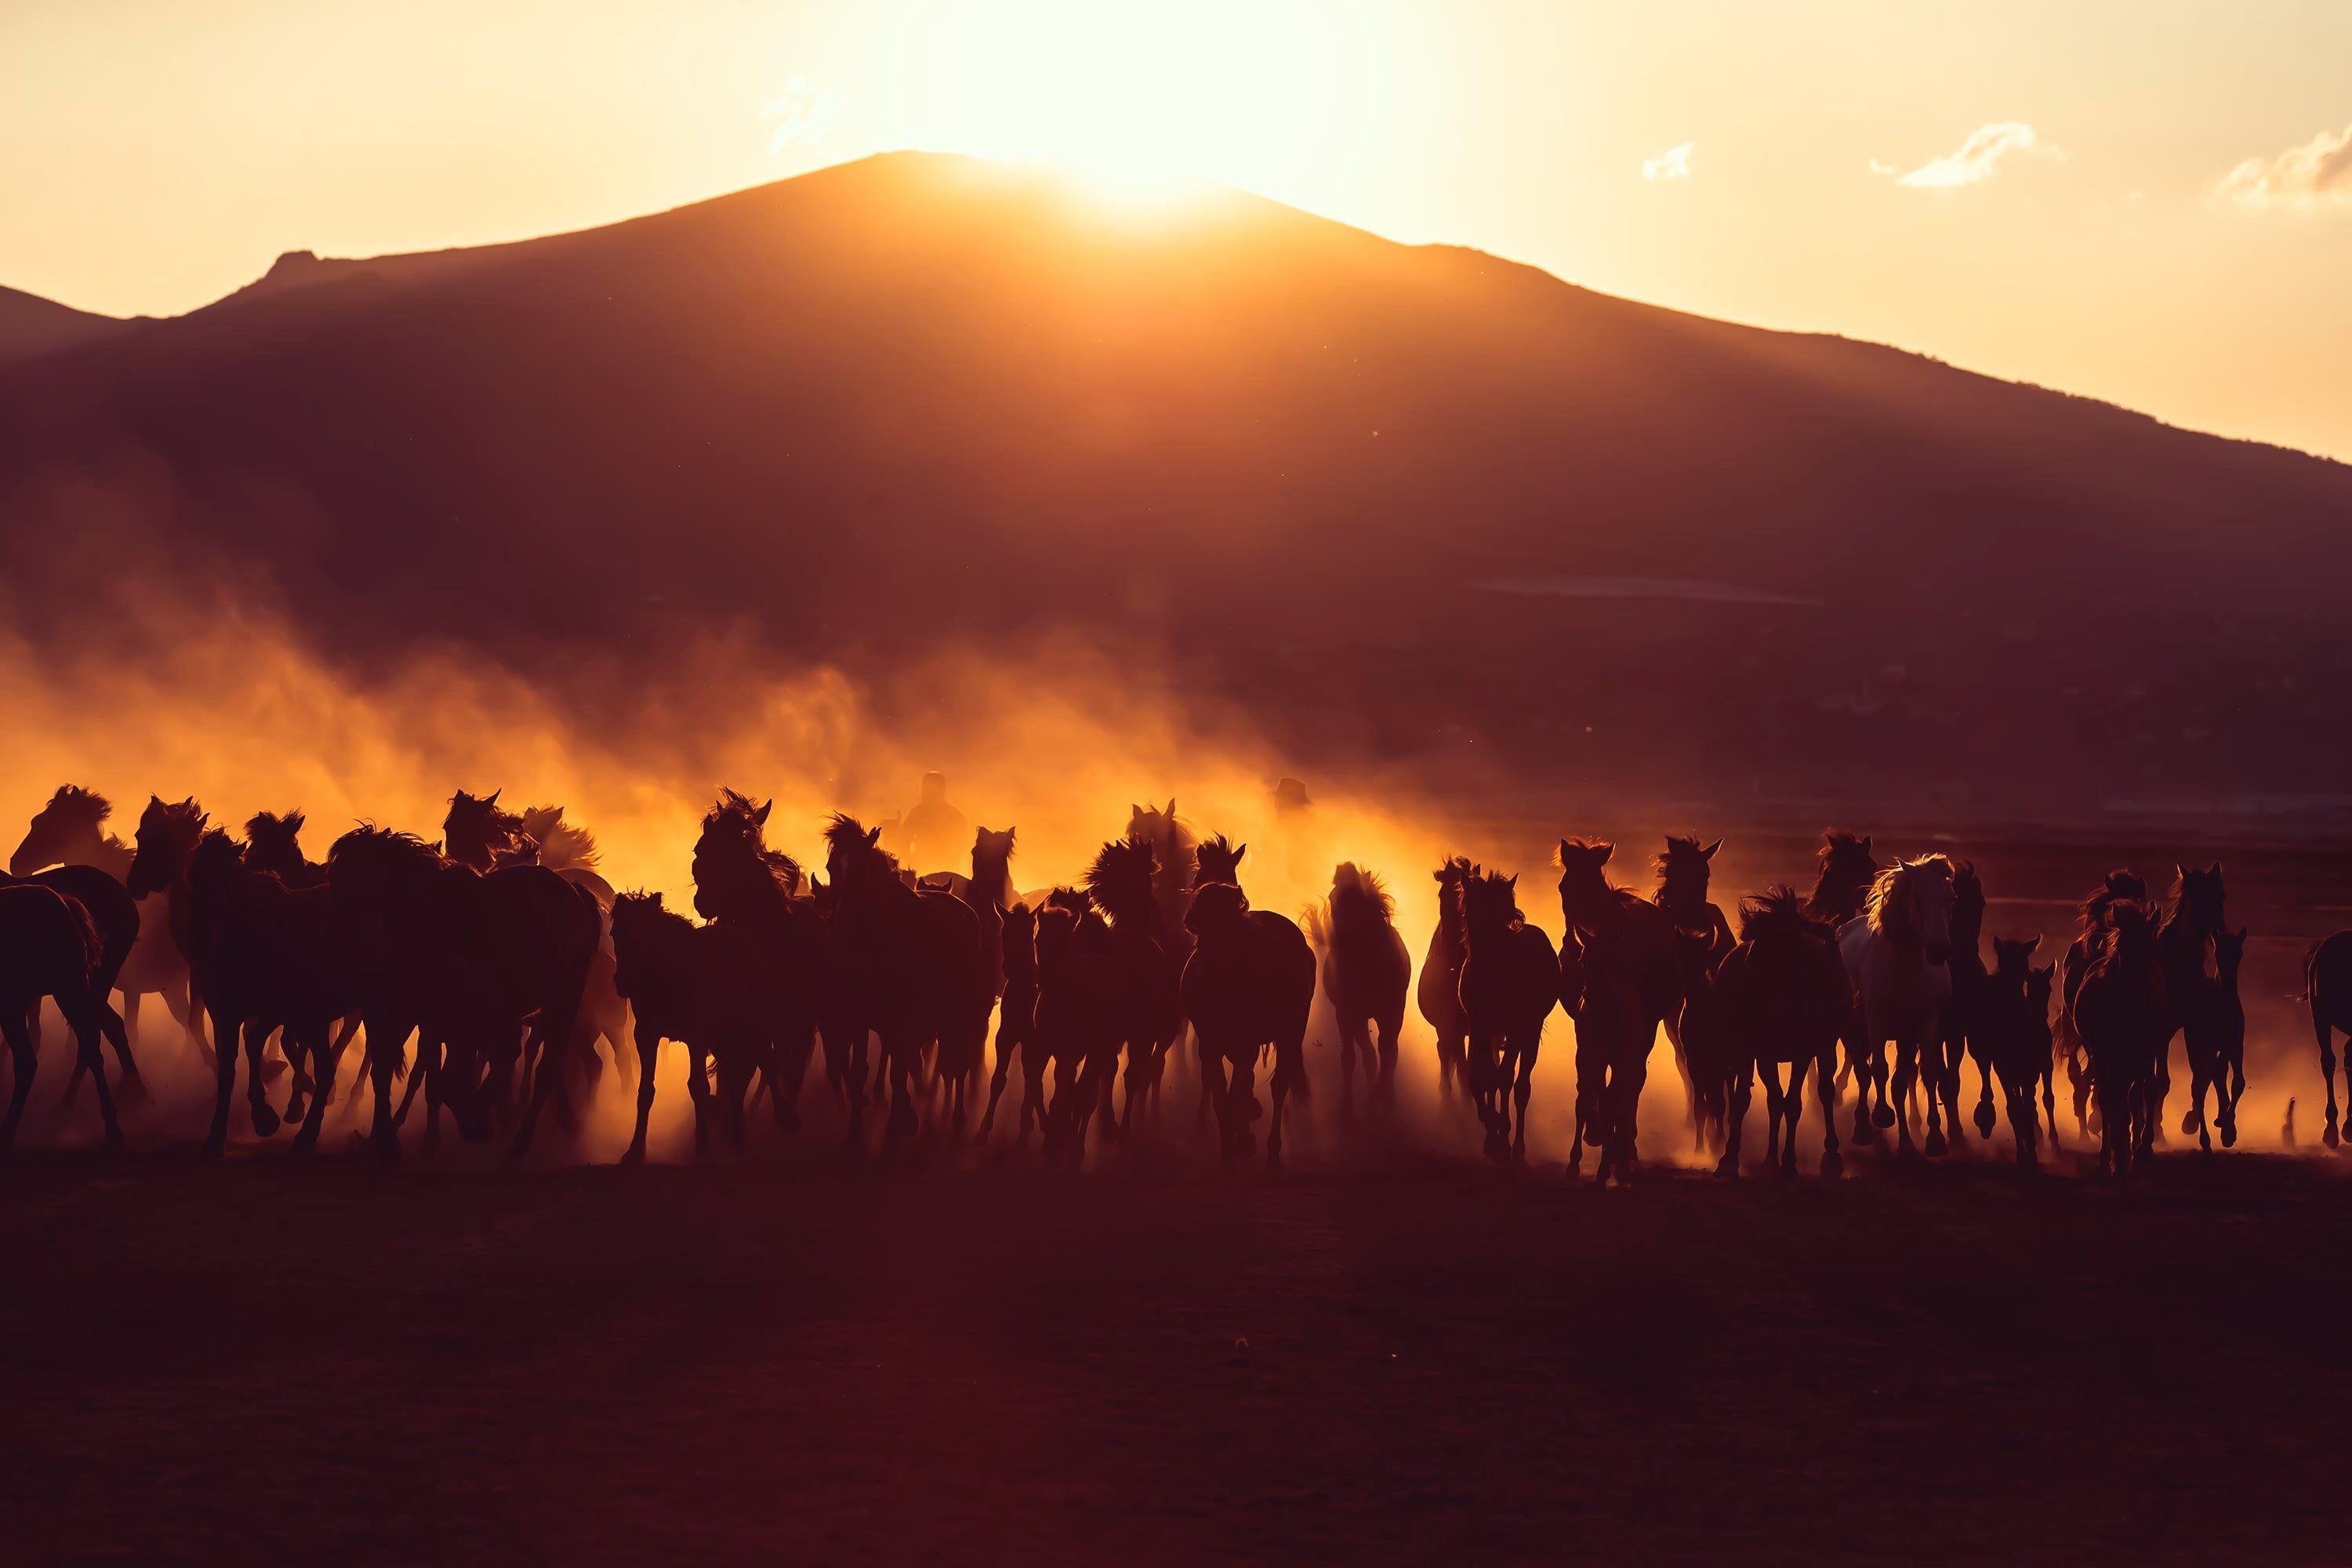 Horses 4K wallpaper for your desktop or mobile screen free and easy to download